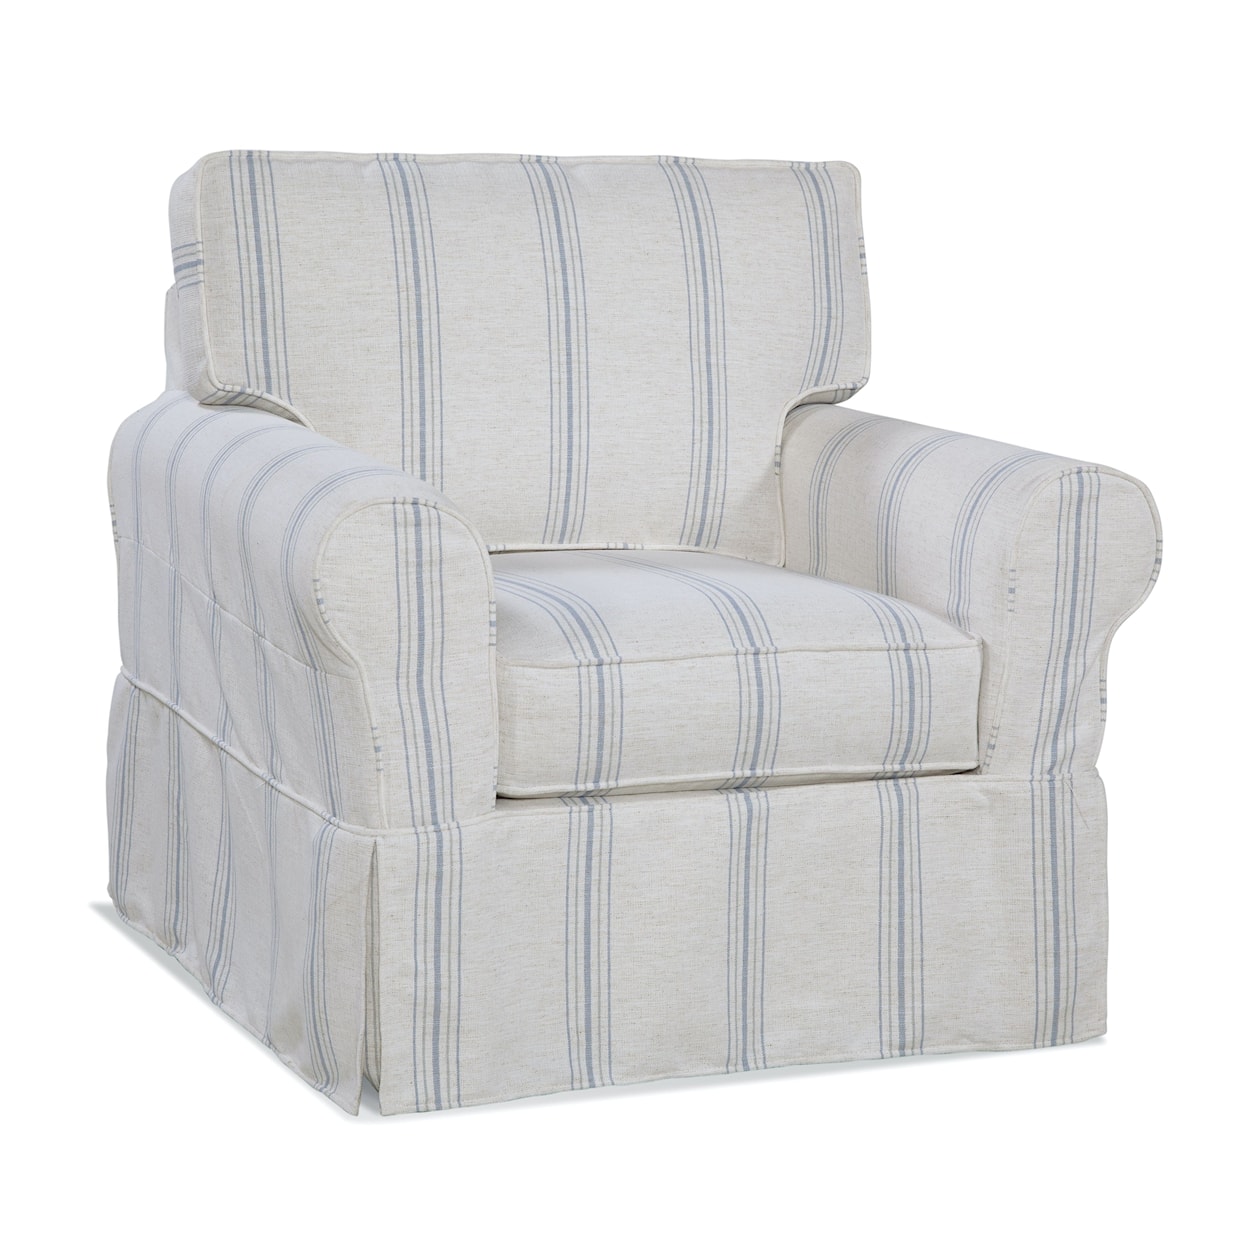 Braxton Culler Bedford Chair with Slipcover